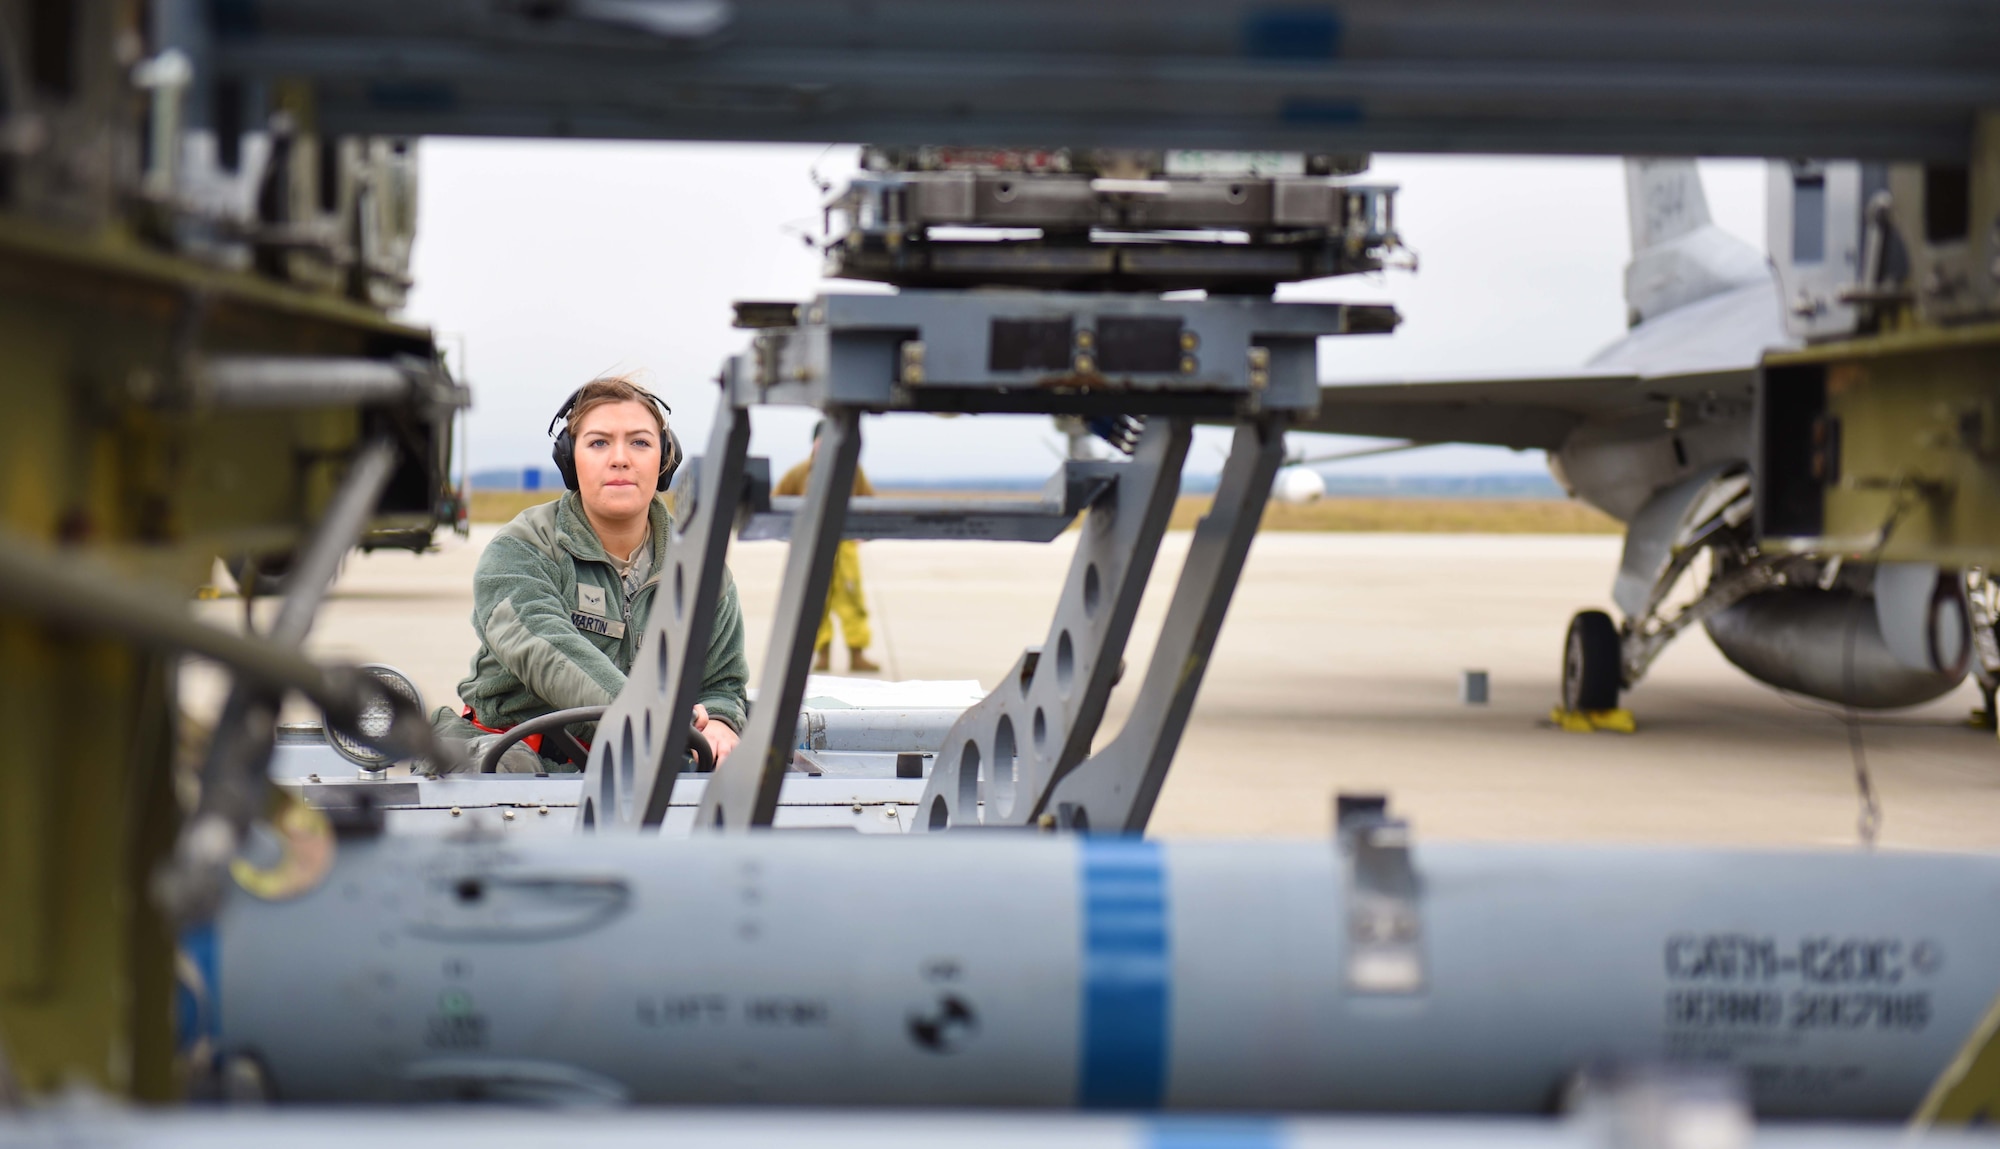 U.S. Air Force Airman 1st Class Nevada Martin, 52nd Aircraft Maintenance Squadron weapons load team 
member, operates a bomb lift truck to attach an AIM-120 missile onto an F-16 Fighting Falcon during an 
Agile Combat Employment exercise at Spangdahlem Air Base, Germany, Jan. 14, 2020. This exercise 
simulated a forward deployed environment for operating without prepositioned equipment. (U.S. Air 
Force photo by Staff Sgt. Joshua R. M. Dewberry)